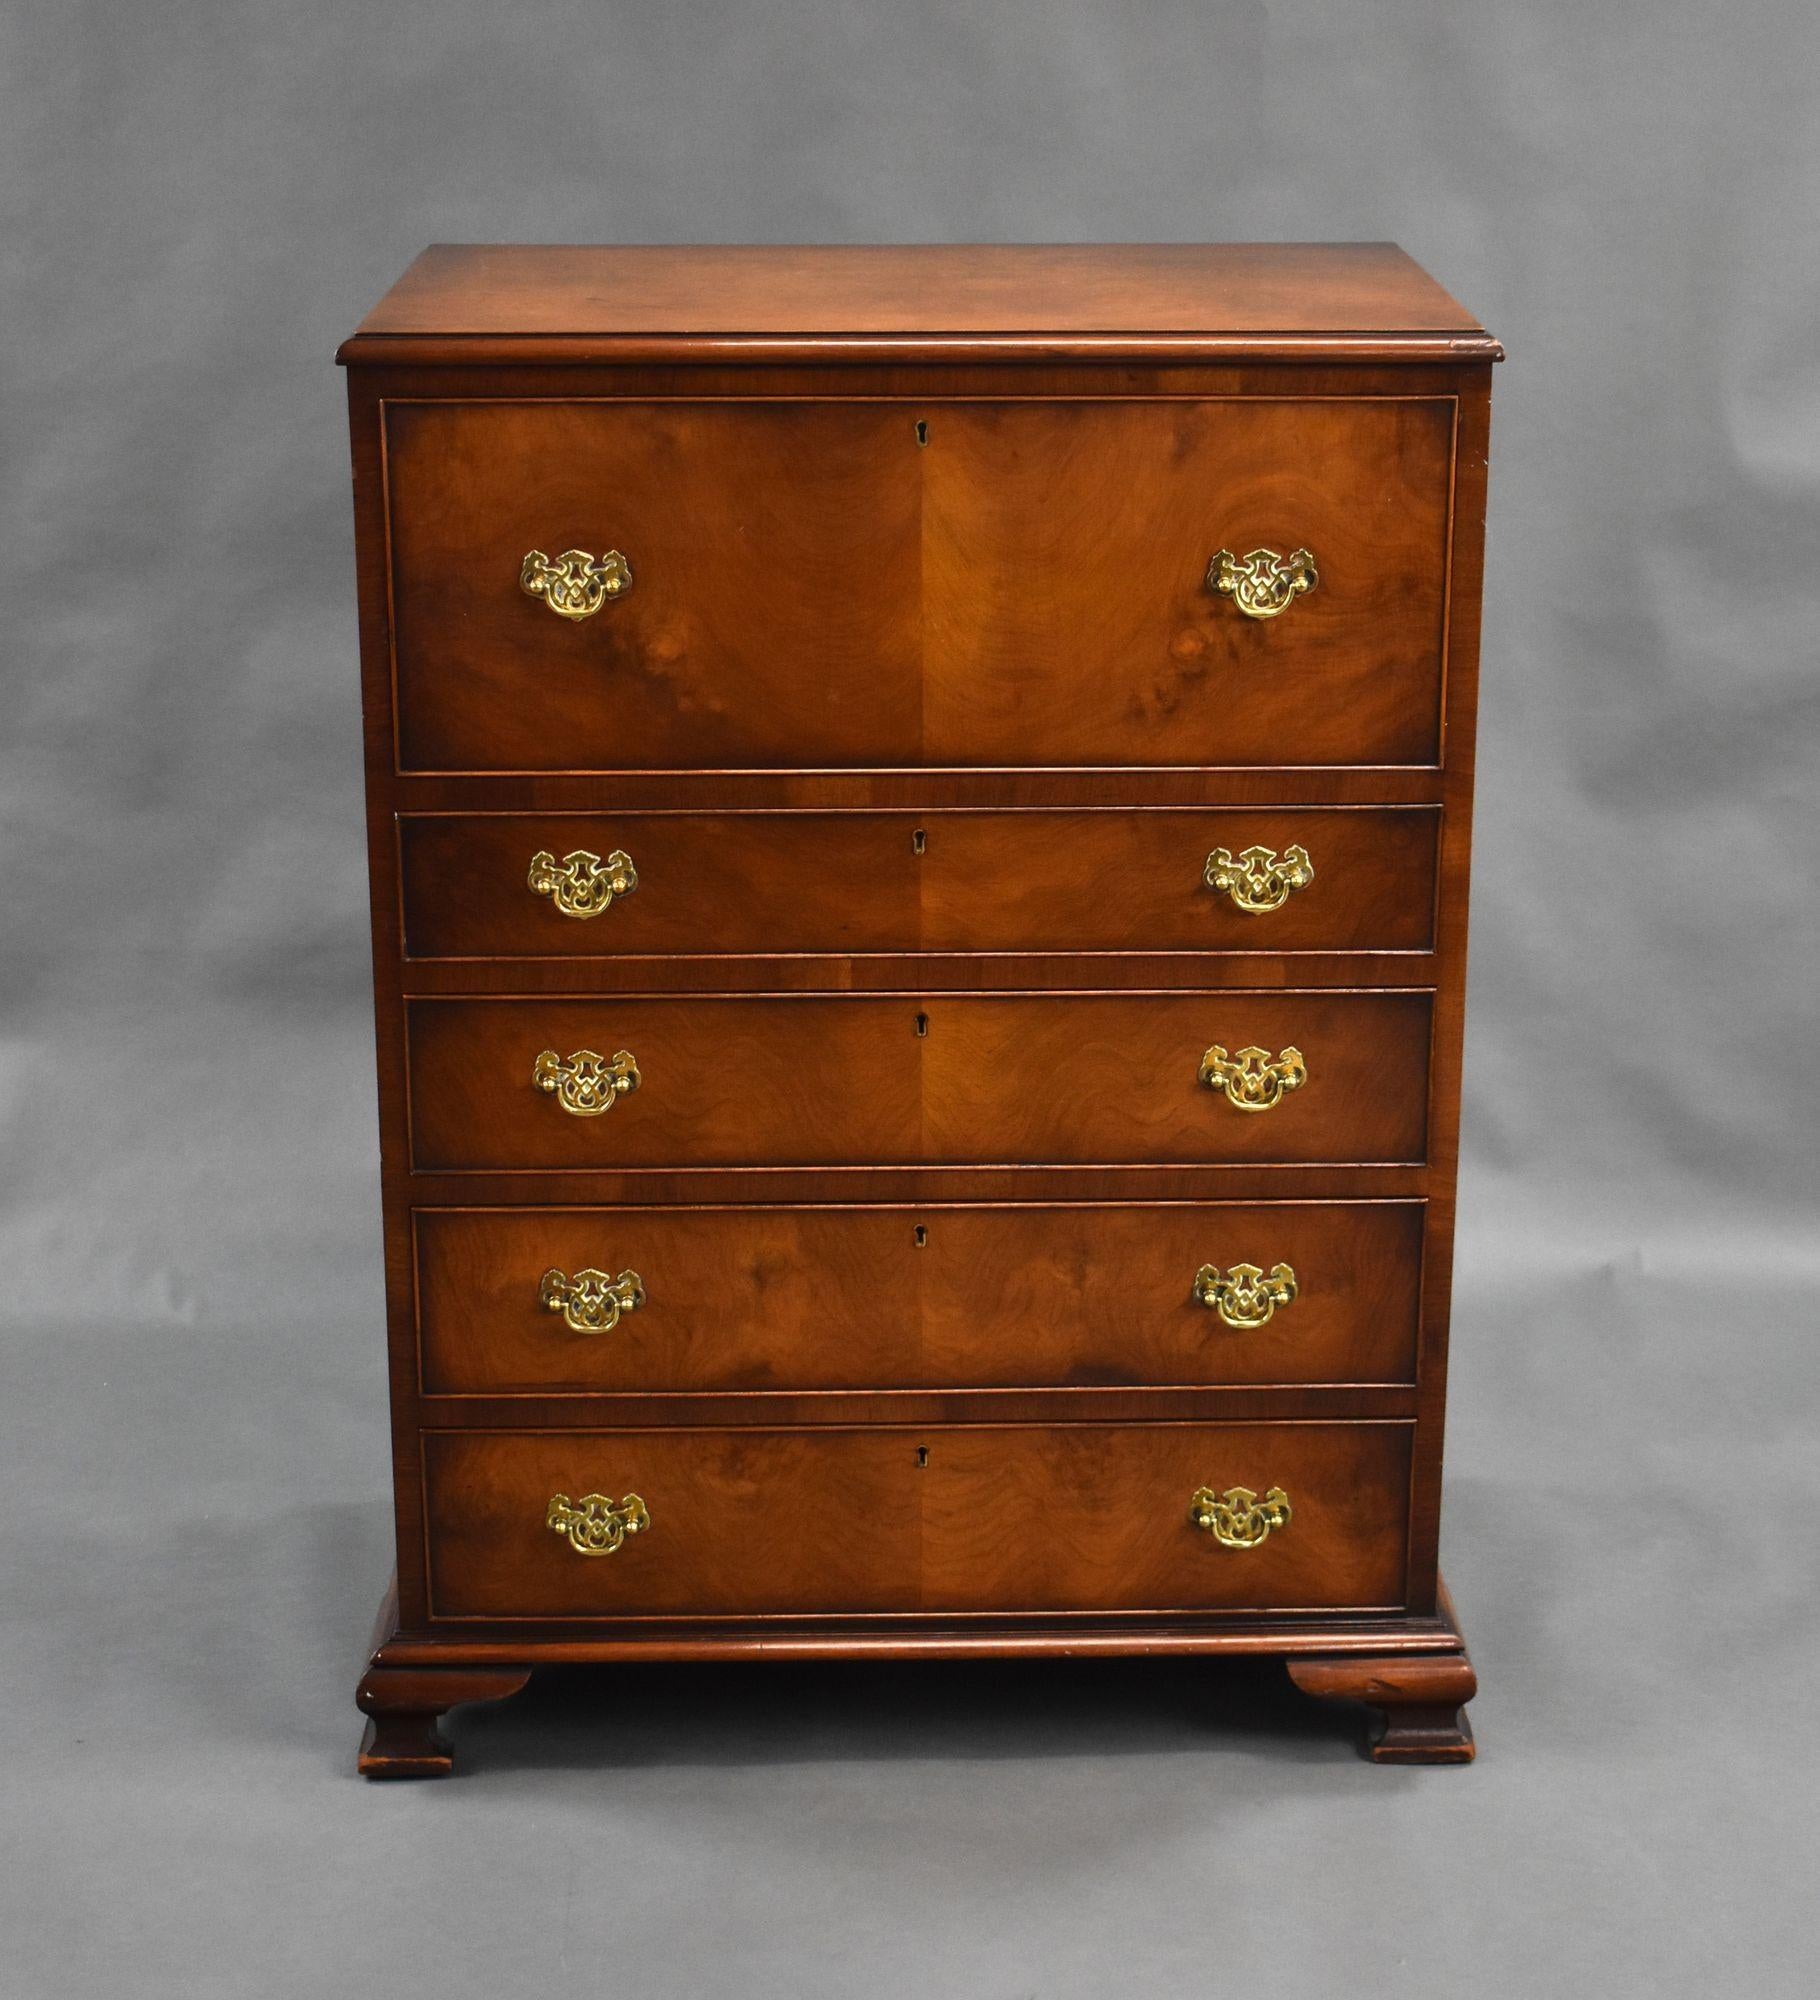 European Antique Figured Walnut Secretaire Chest of Drawers For Sale